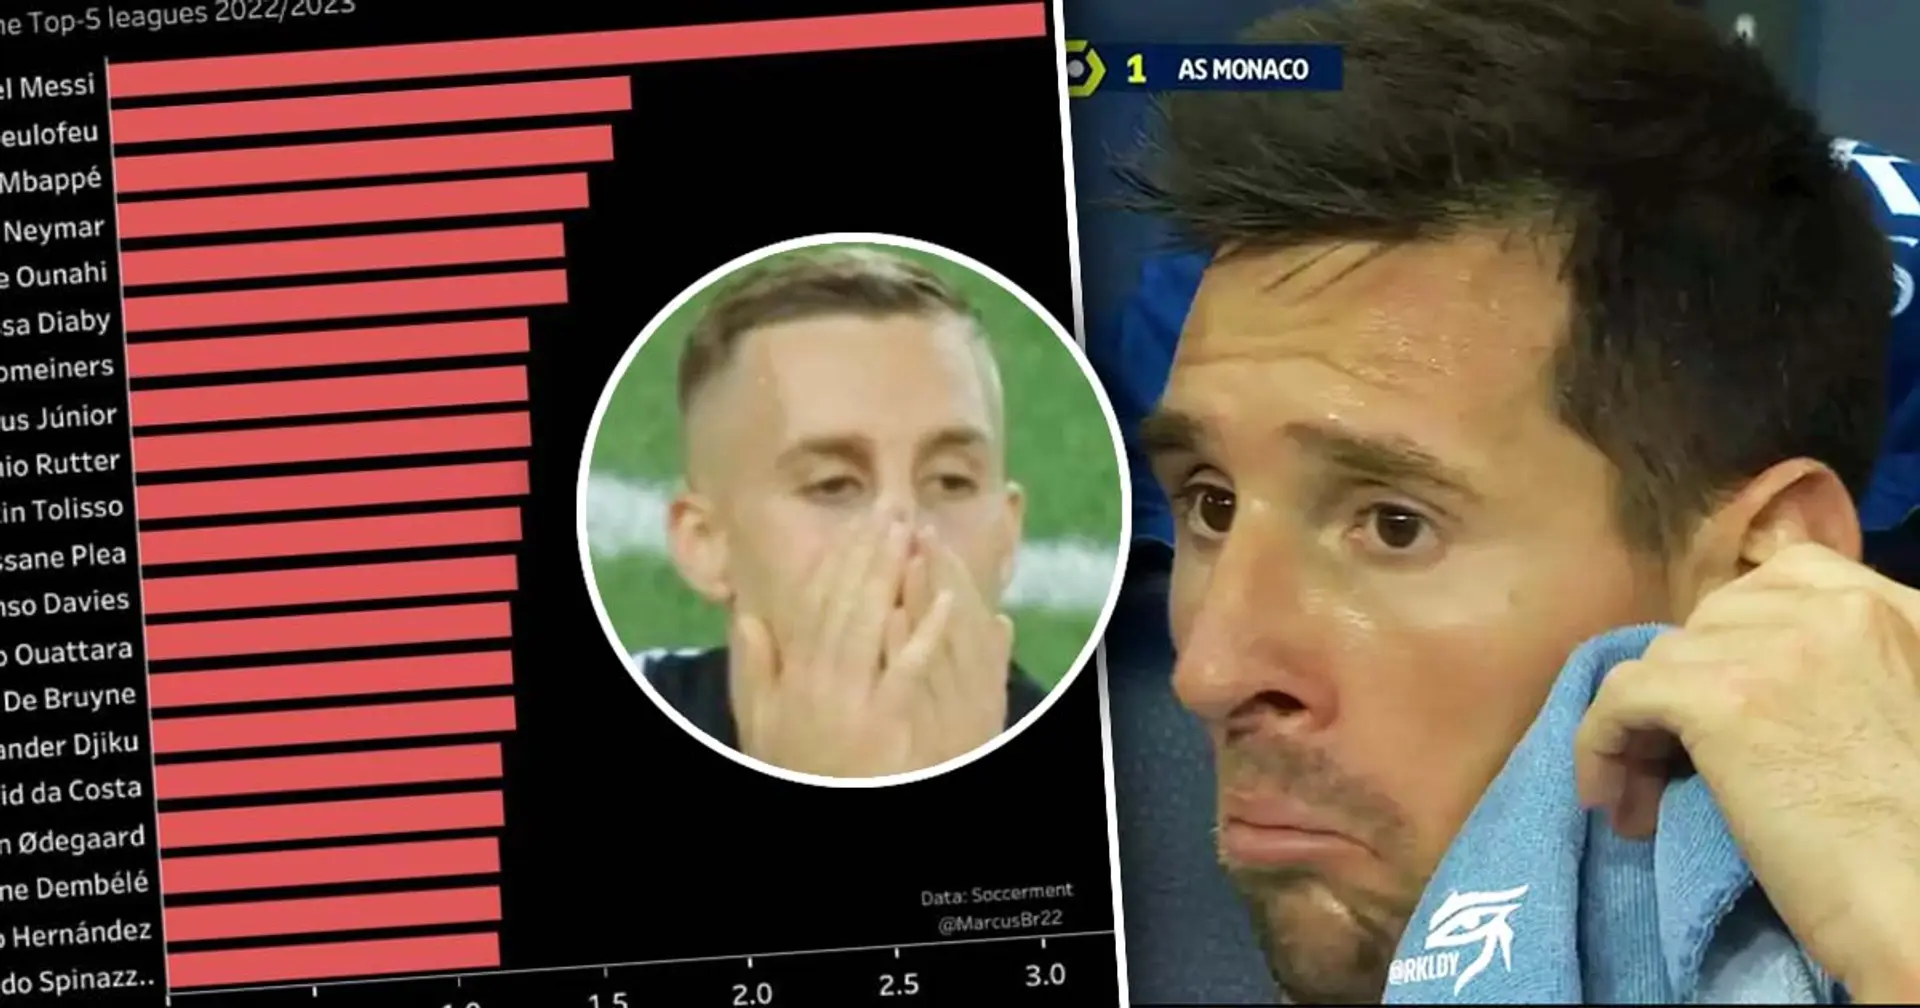 Gerard Deulofeu re-tweets one curious stat, Messi miles ahead of the rest